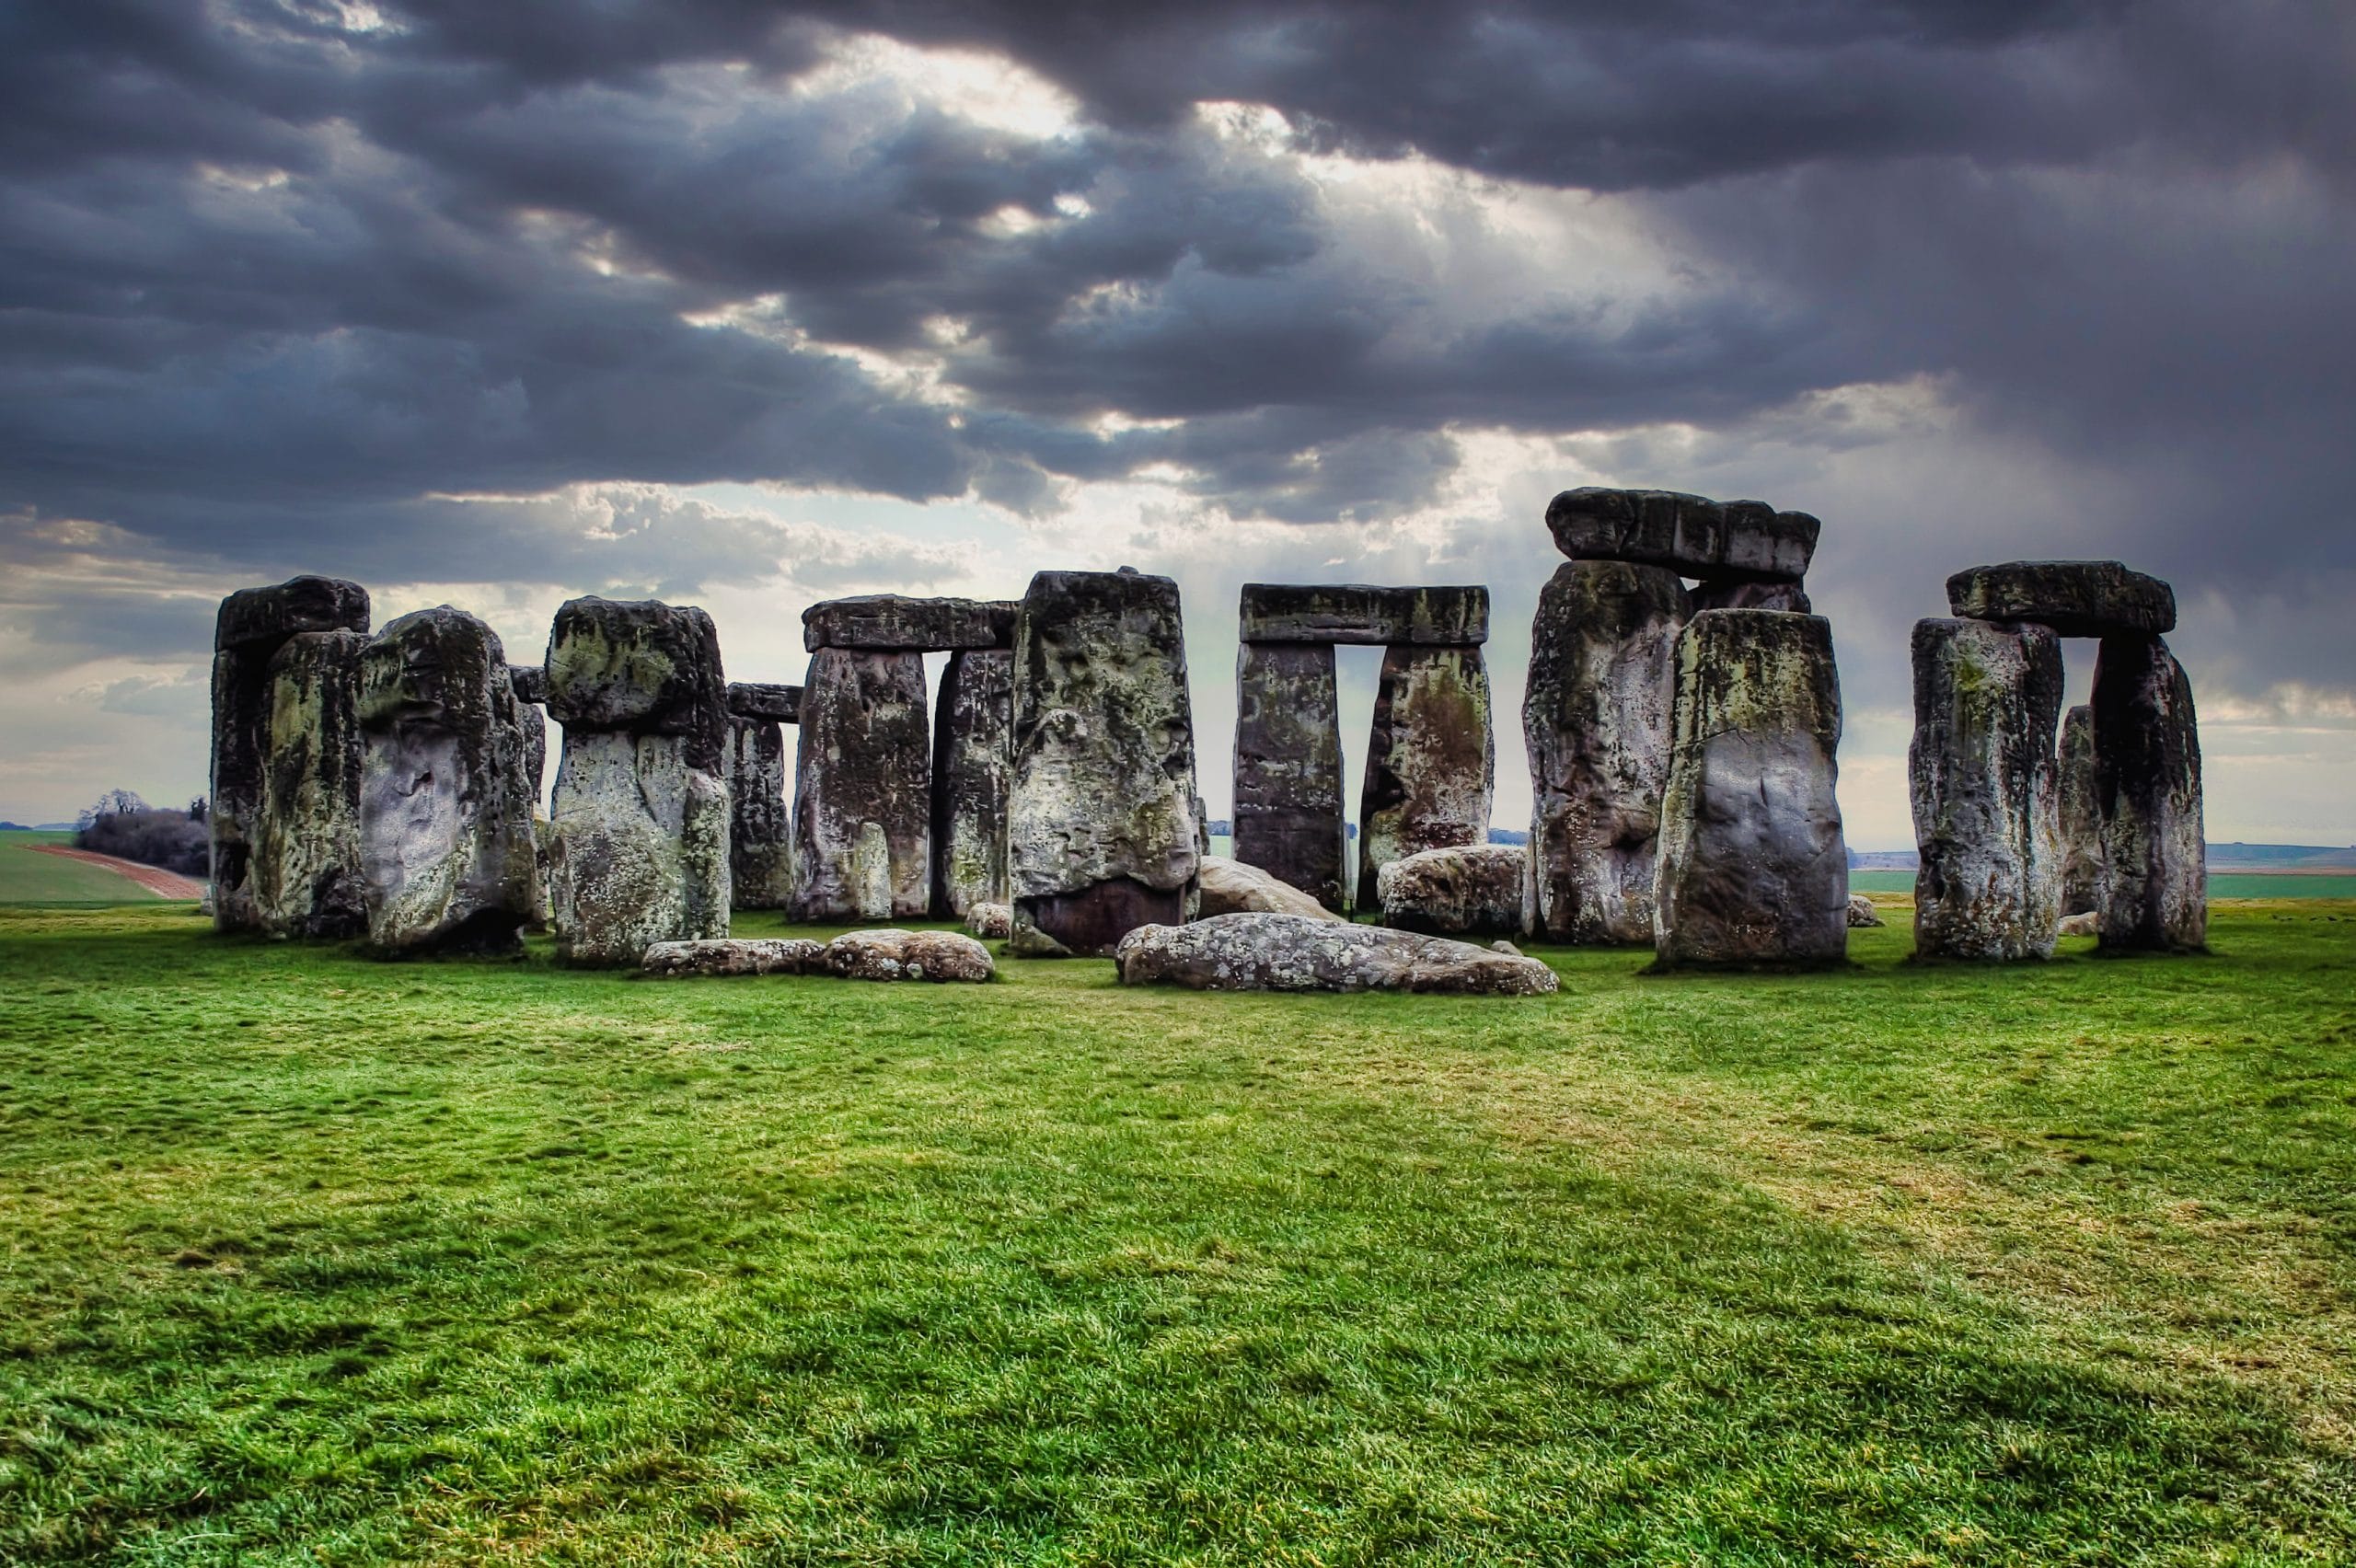 A high contrast shot of the Stonehenge stones in Sailsbury, UK, on cloudy, rainy day with green grass